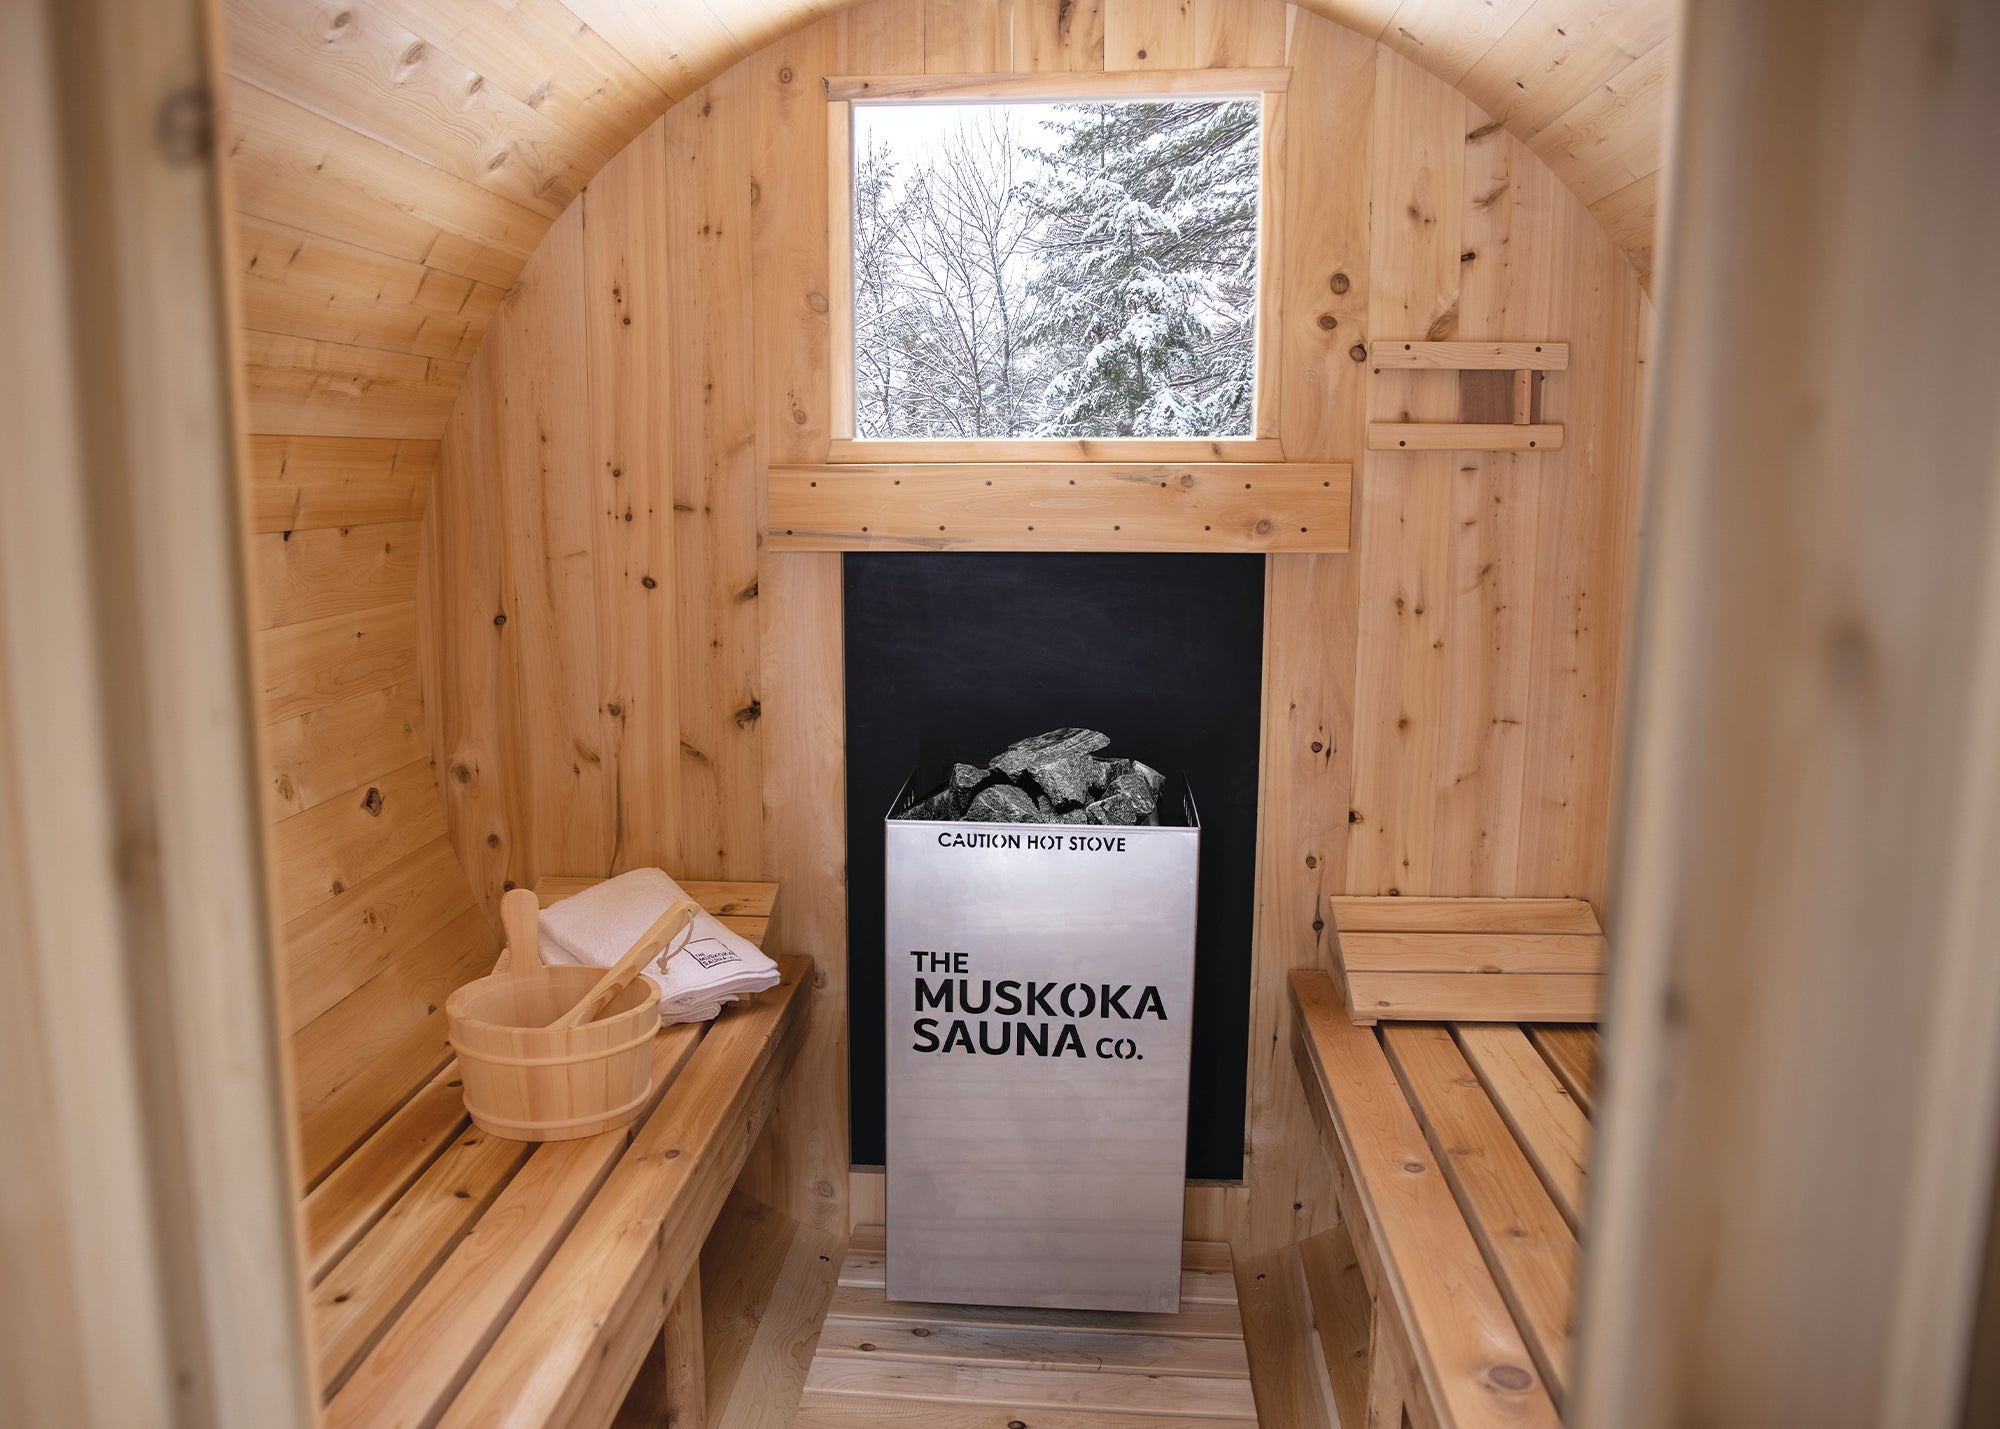 Classic 6'x 6' Barrel Sauna with Premium Cedar Wood and Deluxe Heater System